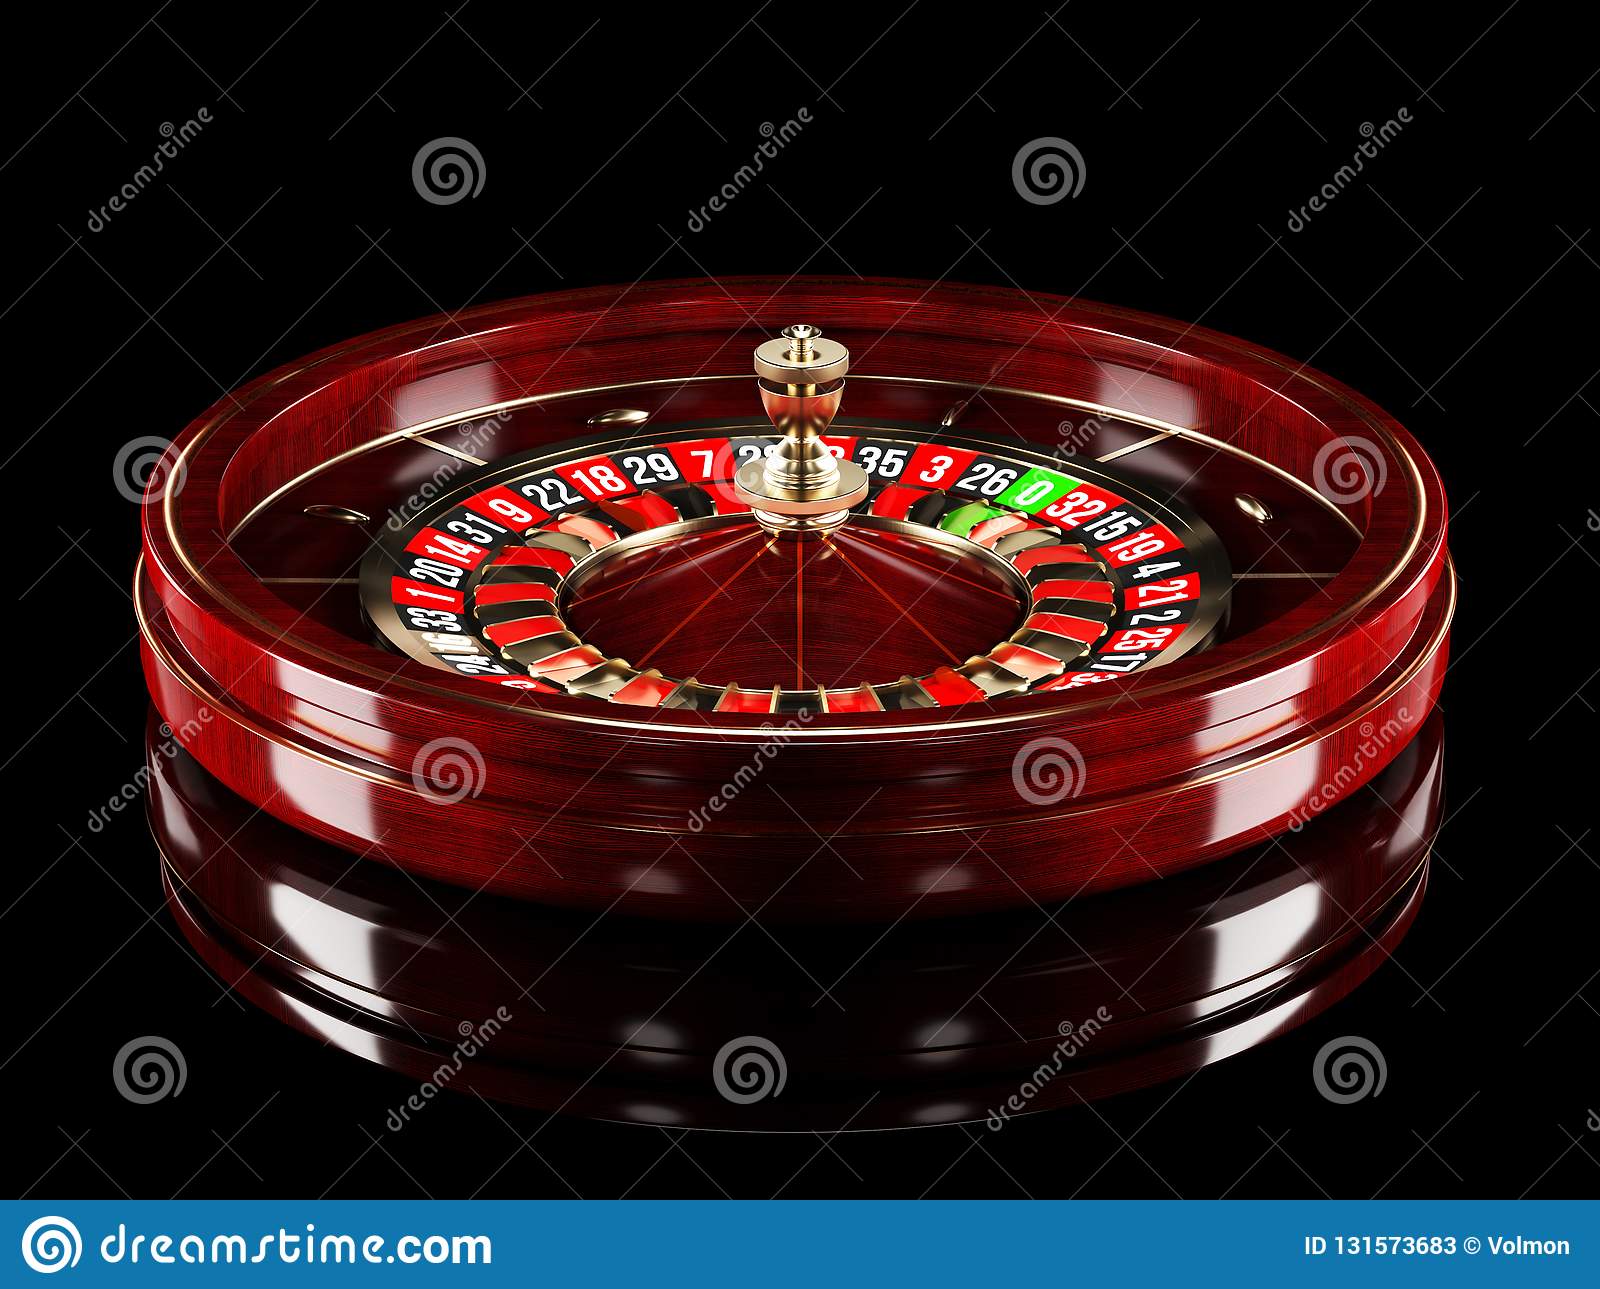 Every game online casino